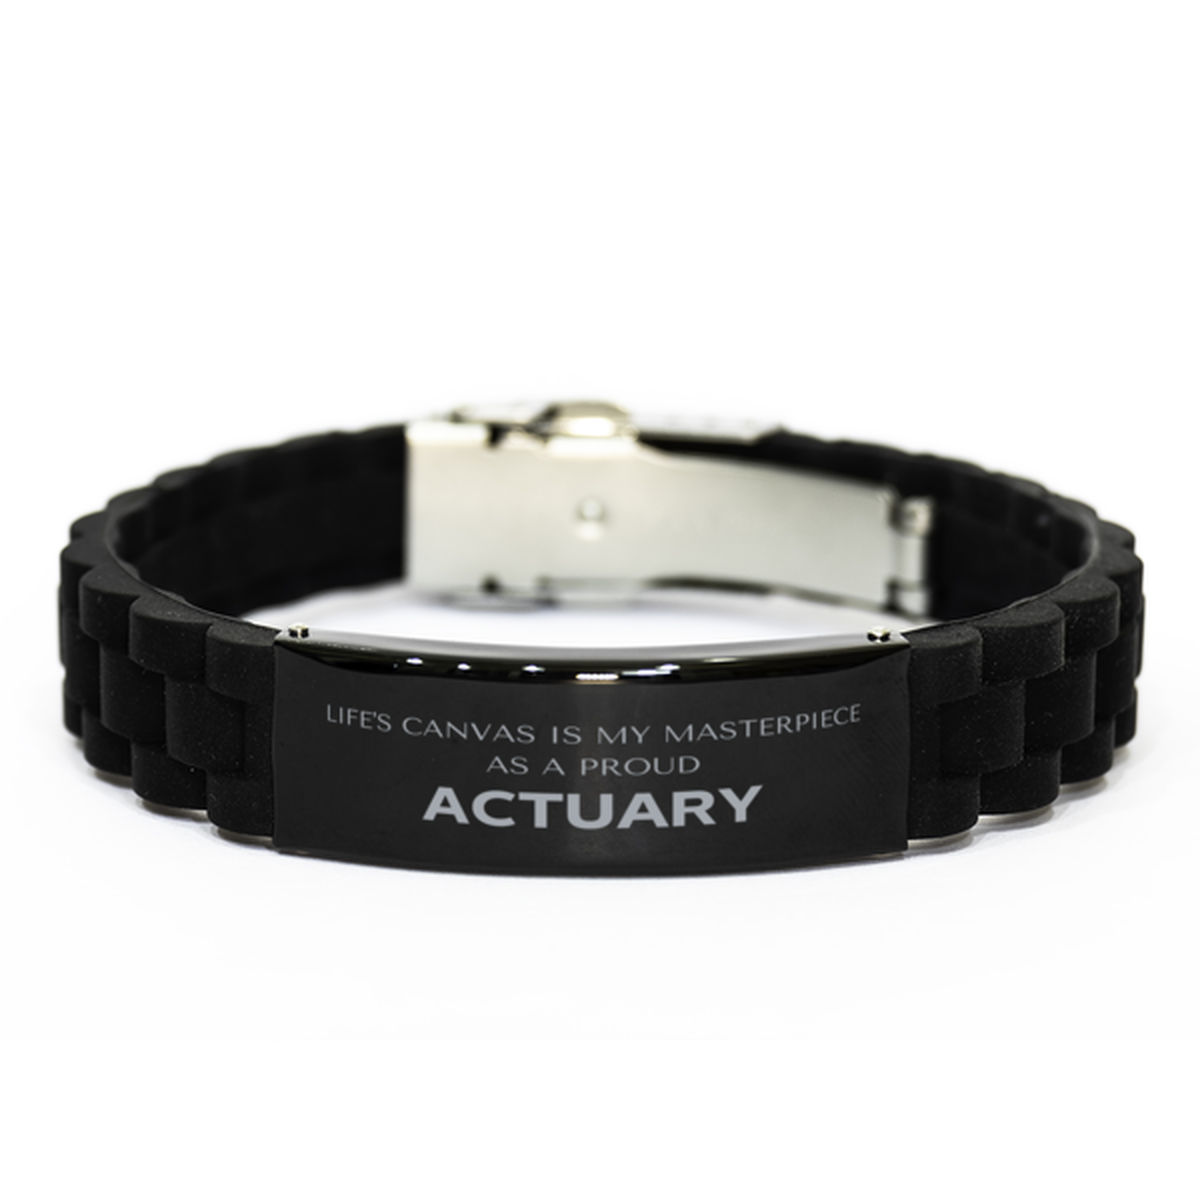 Proud Actuary Gifts, Life's canvas is my masterpiece, Epic Birthday Christmas Unique Black Glidelock Clasp Bracelet For Actuary, Coworkers, Men, Women, Friends